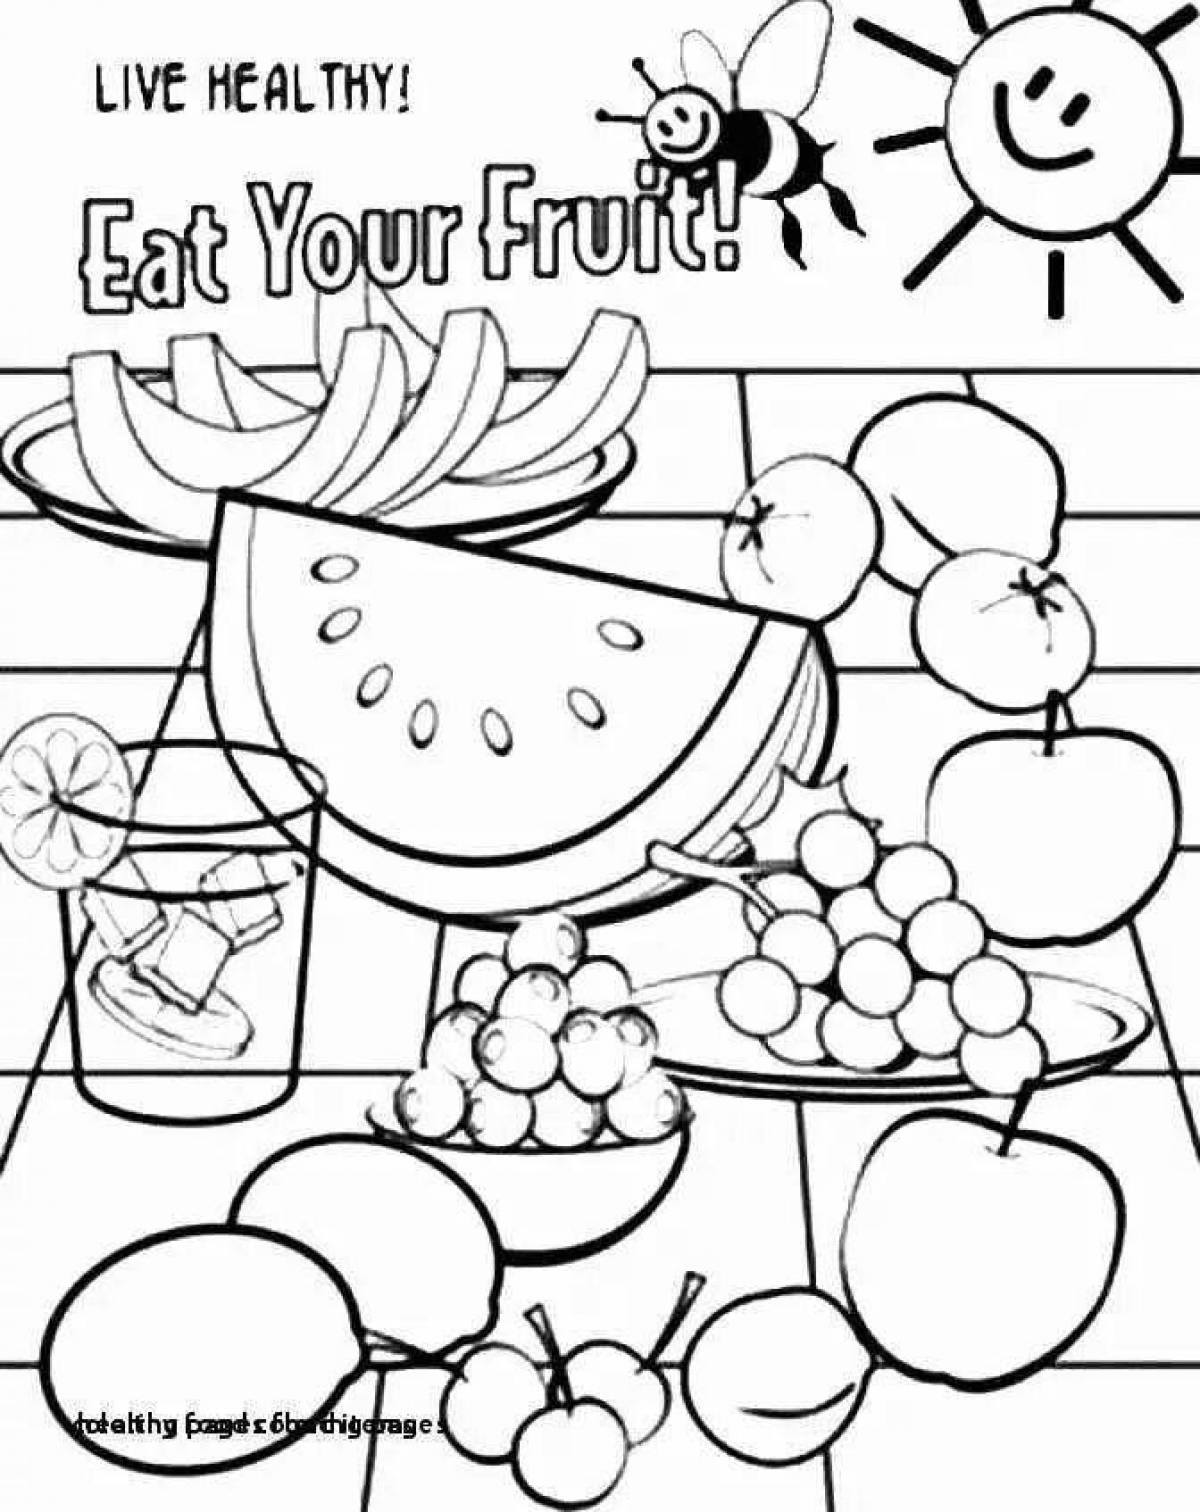 Coloring book healthy food for kids